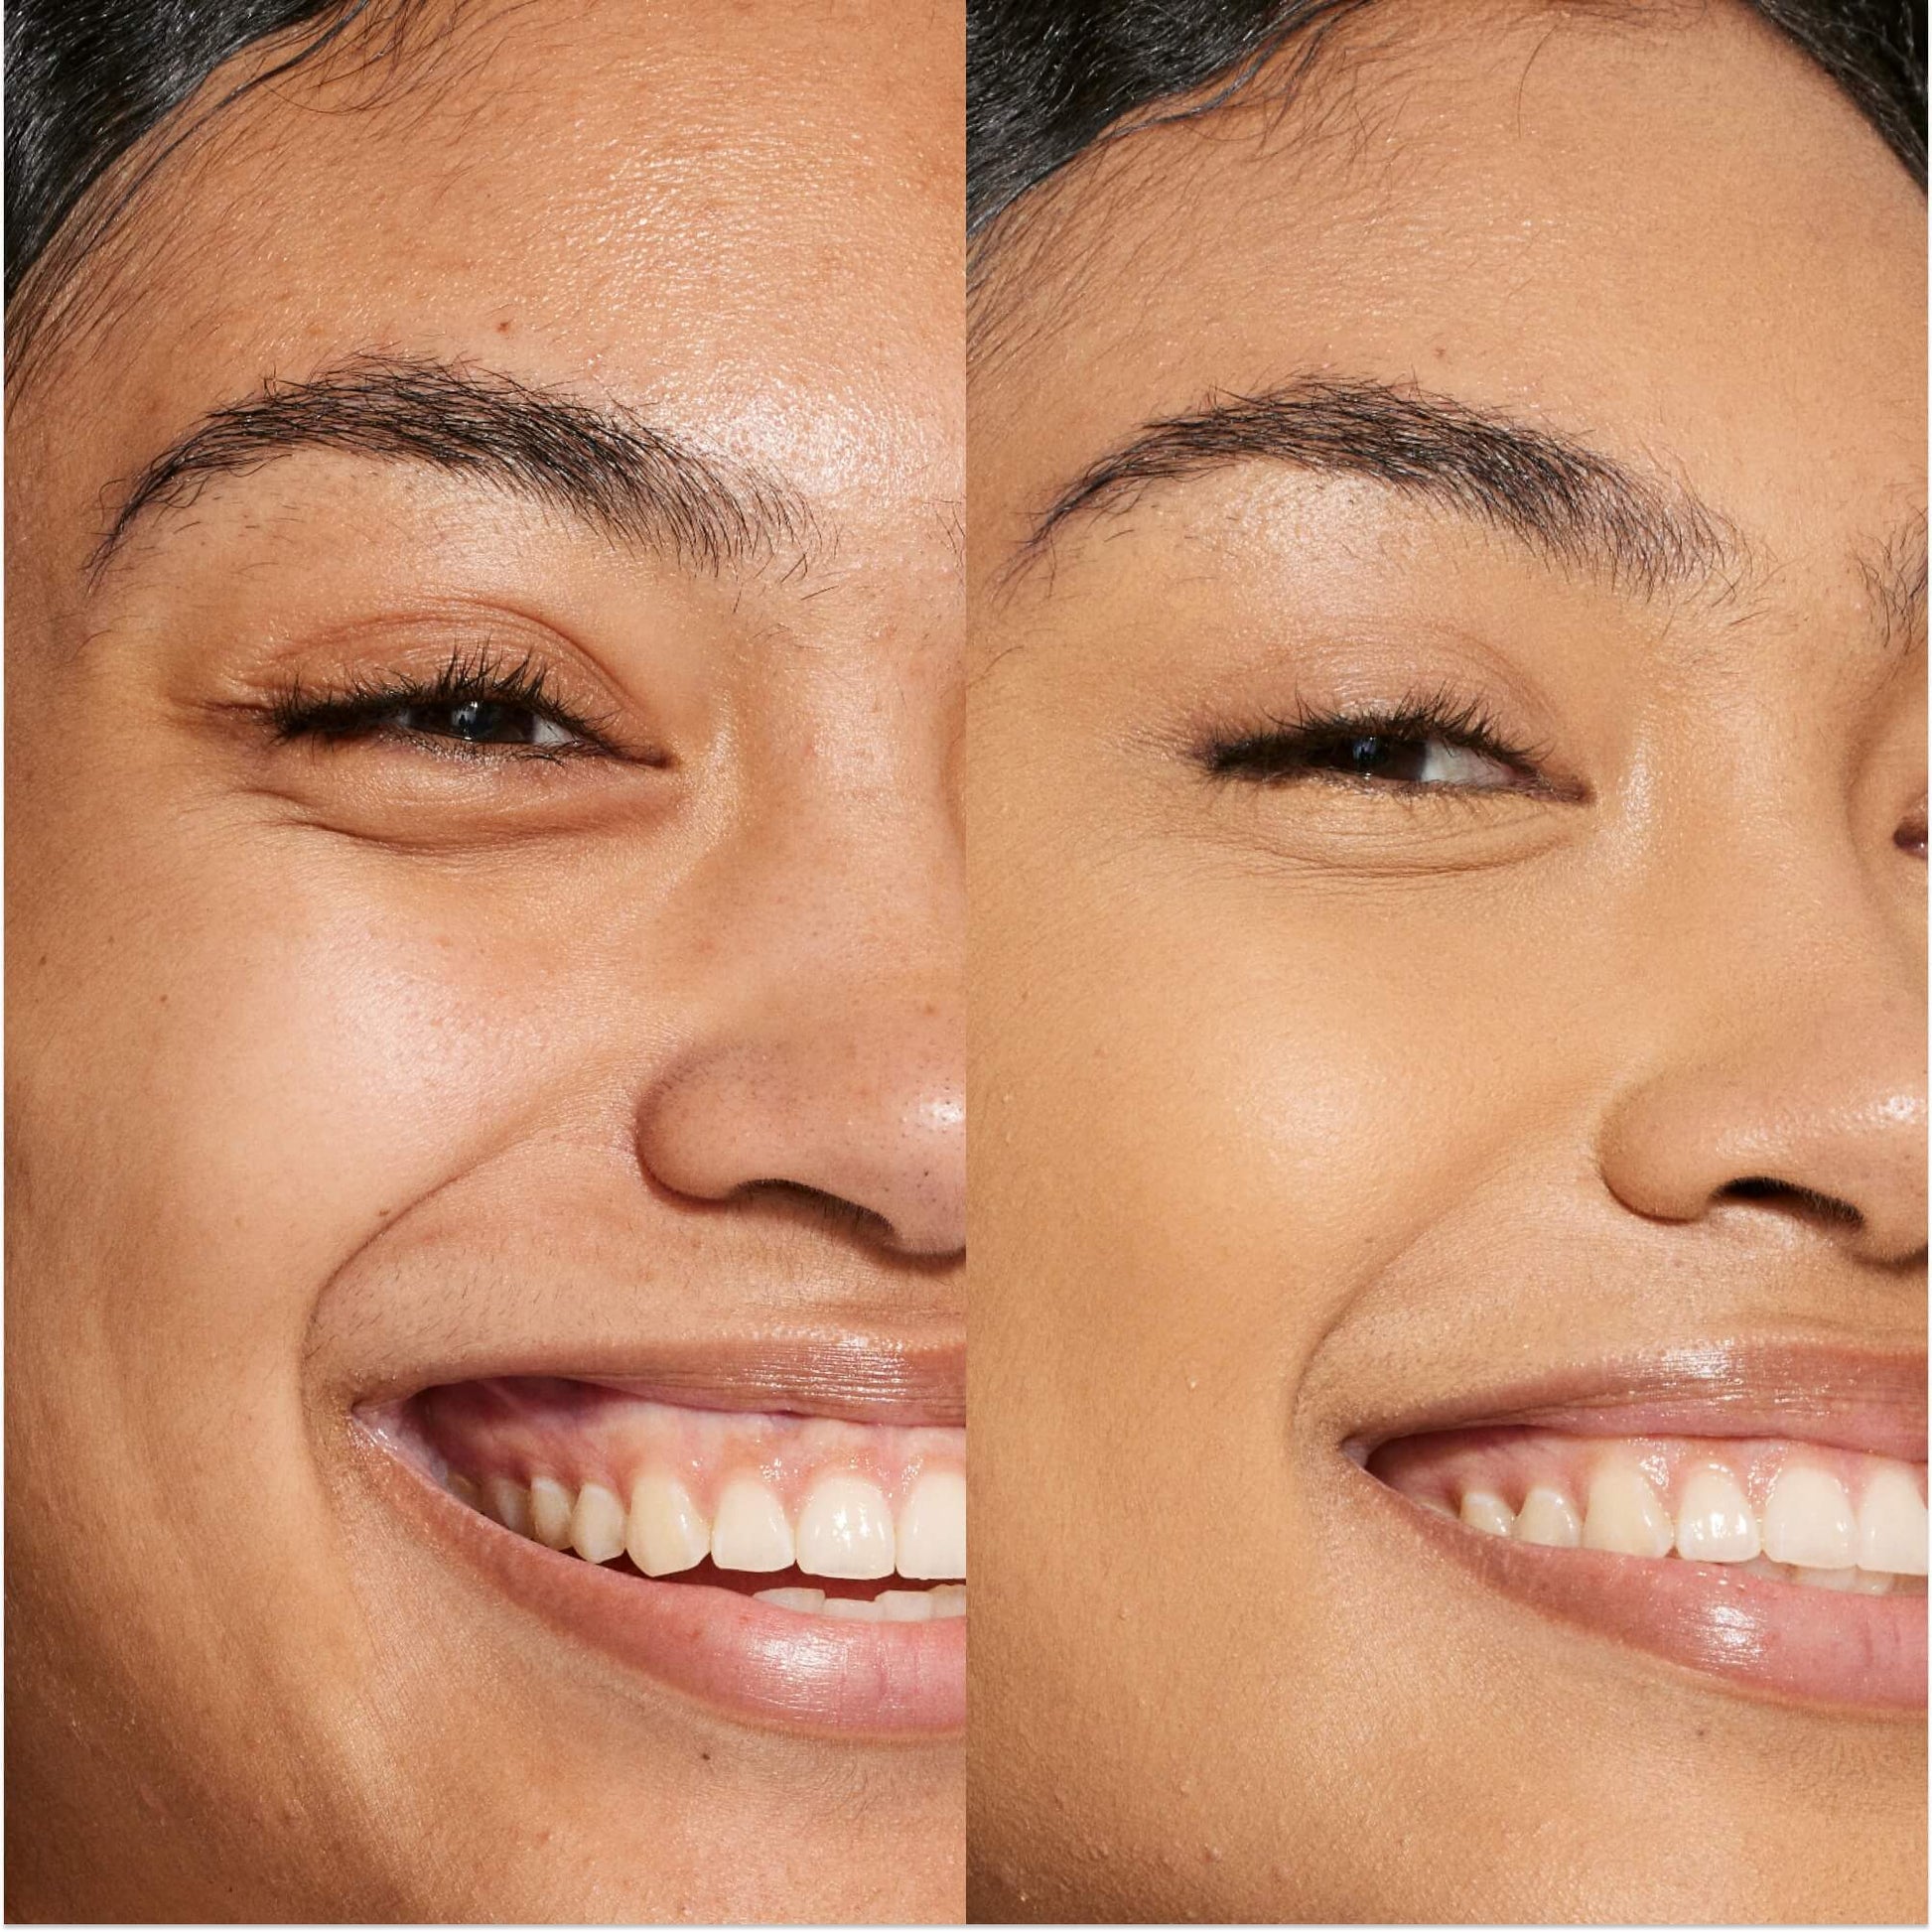 A person's face before and after using Tower 28 Beauty's Swipe Serum Concealer in shade 11.0 OC to cover up dark circles, blemishes, and discoloration